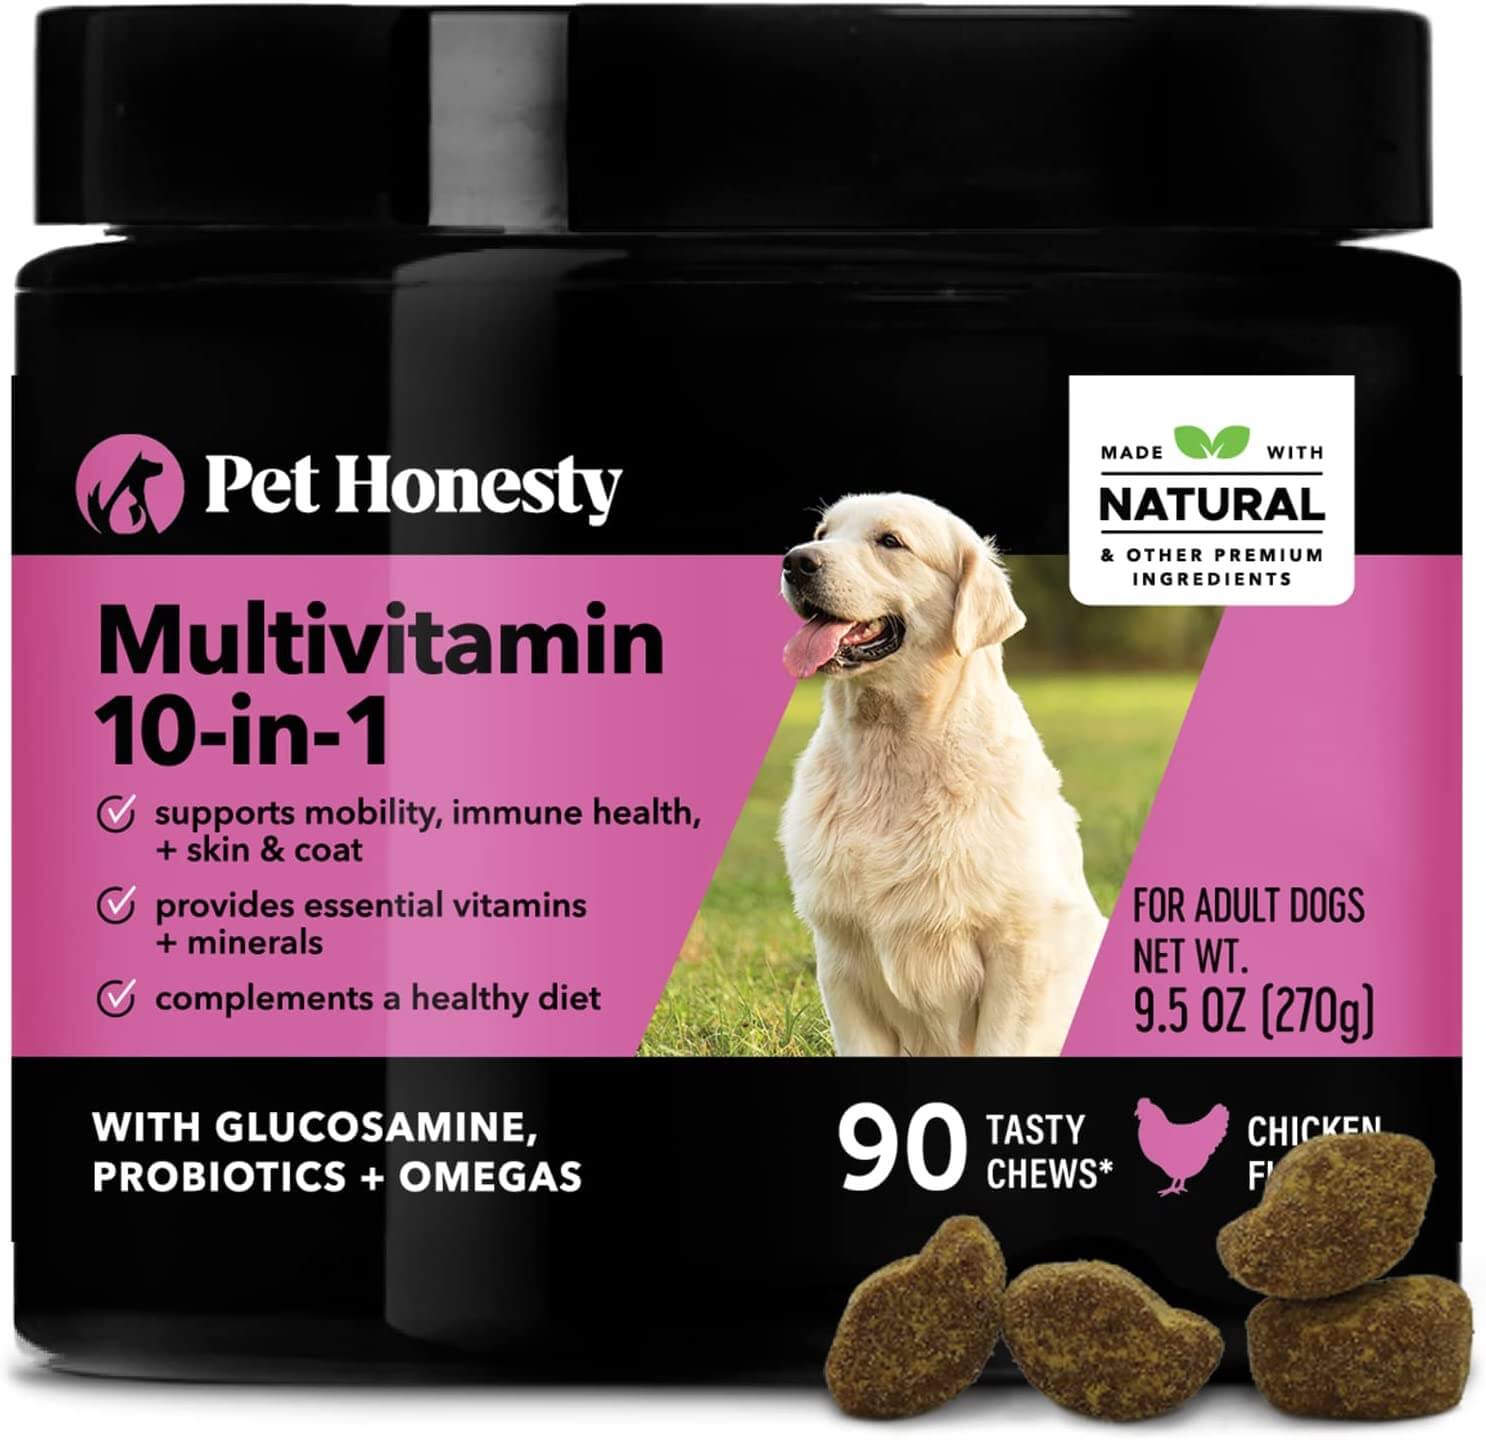 10-in-1 Daily Multivitamin for Dogs: Perfect Overall Health!